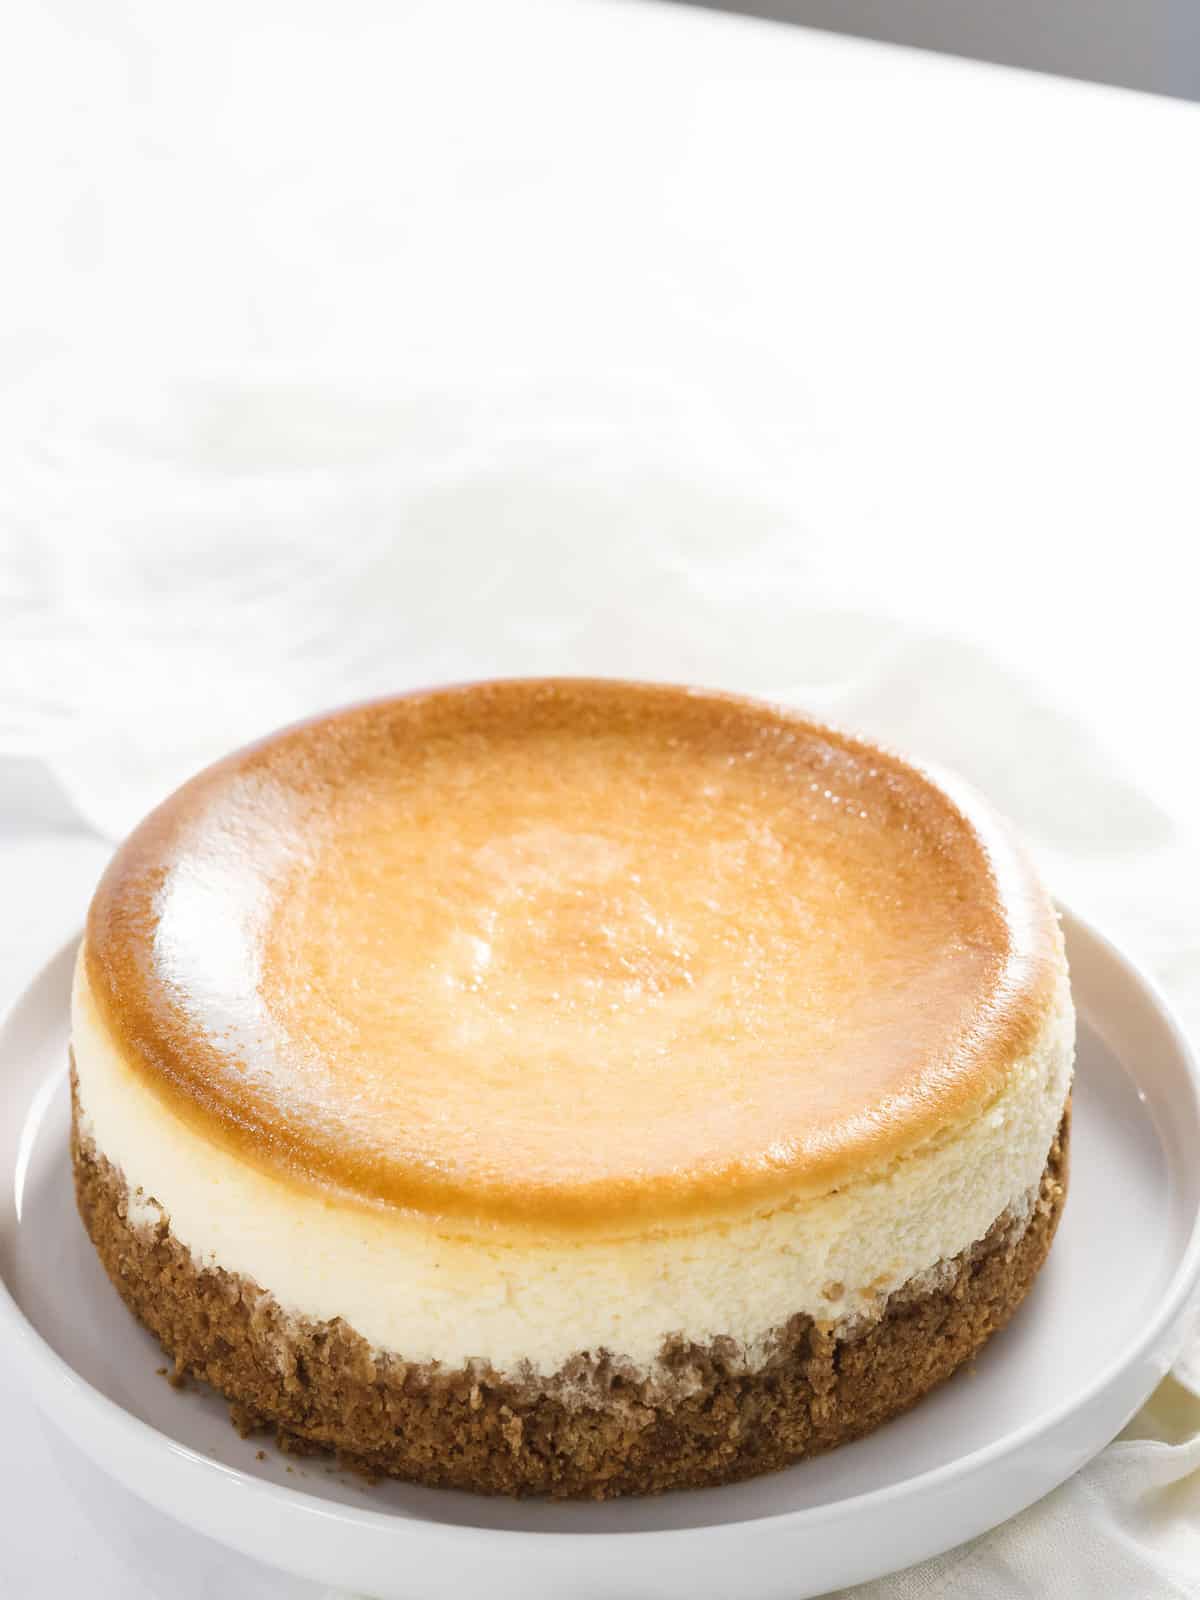 Perfect crack-free New York cheesecake on a plate.